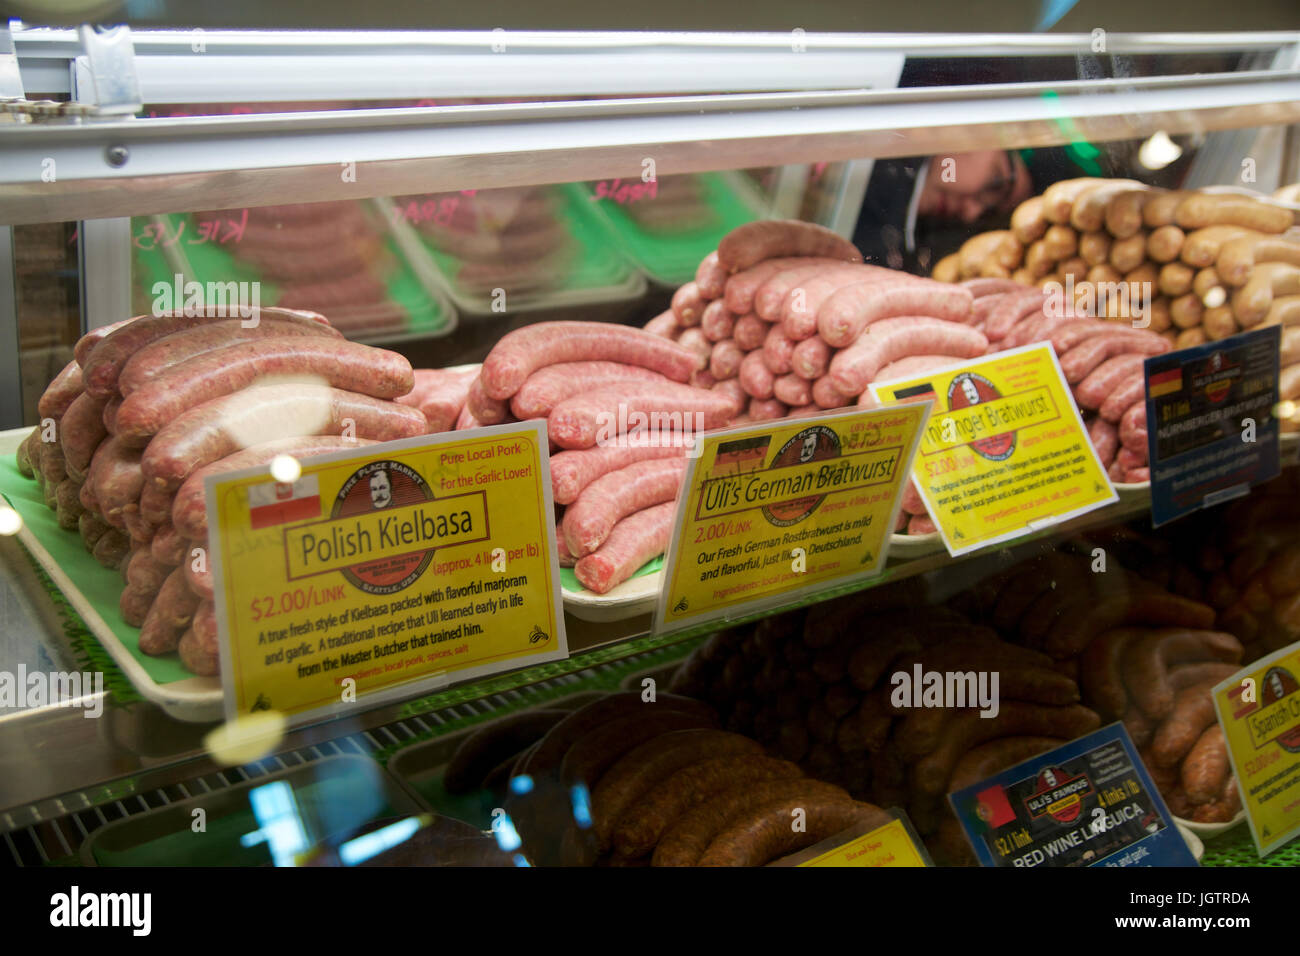 SEATTLE, WASHINGTON, USA - JAN 24th, 2017: Raw pork sausages Bratwurst at Ulis Bierstube at Pike Place Market. This market, opened in 1930, is known for their open air farmers market style Stock Photo